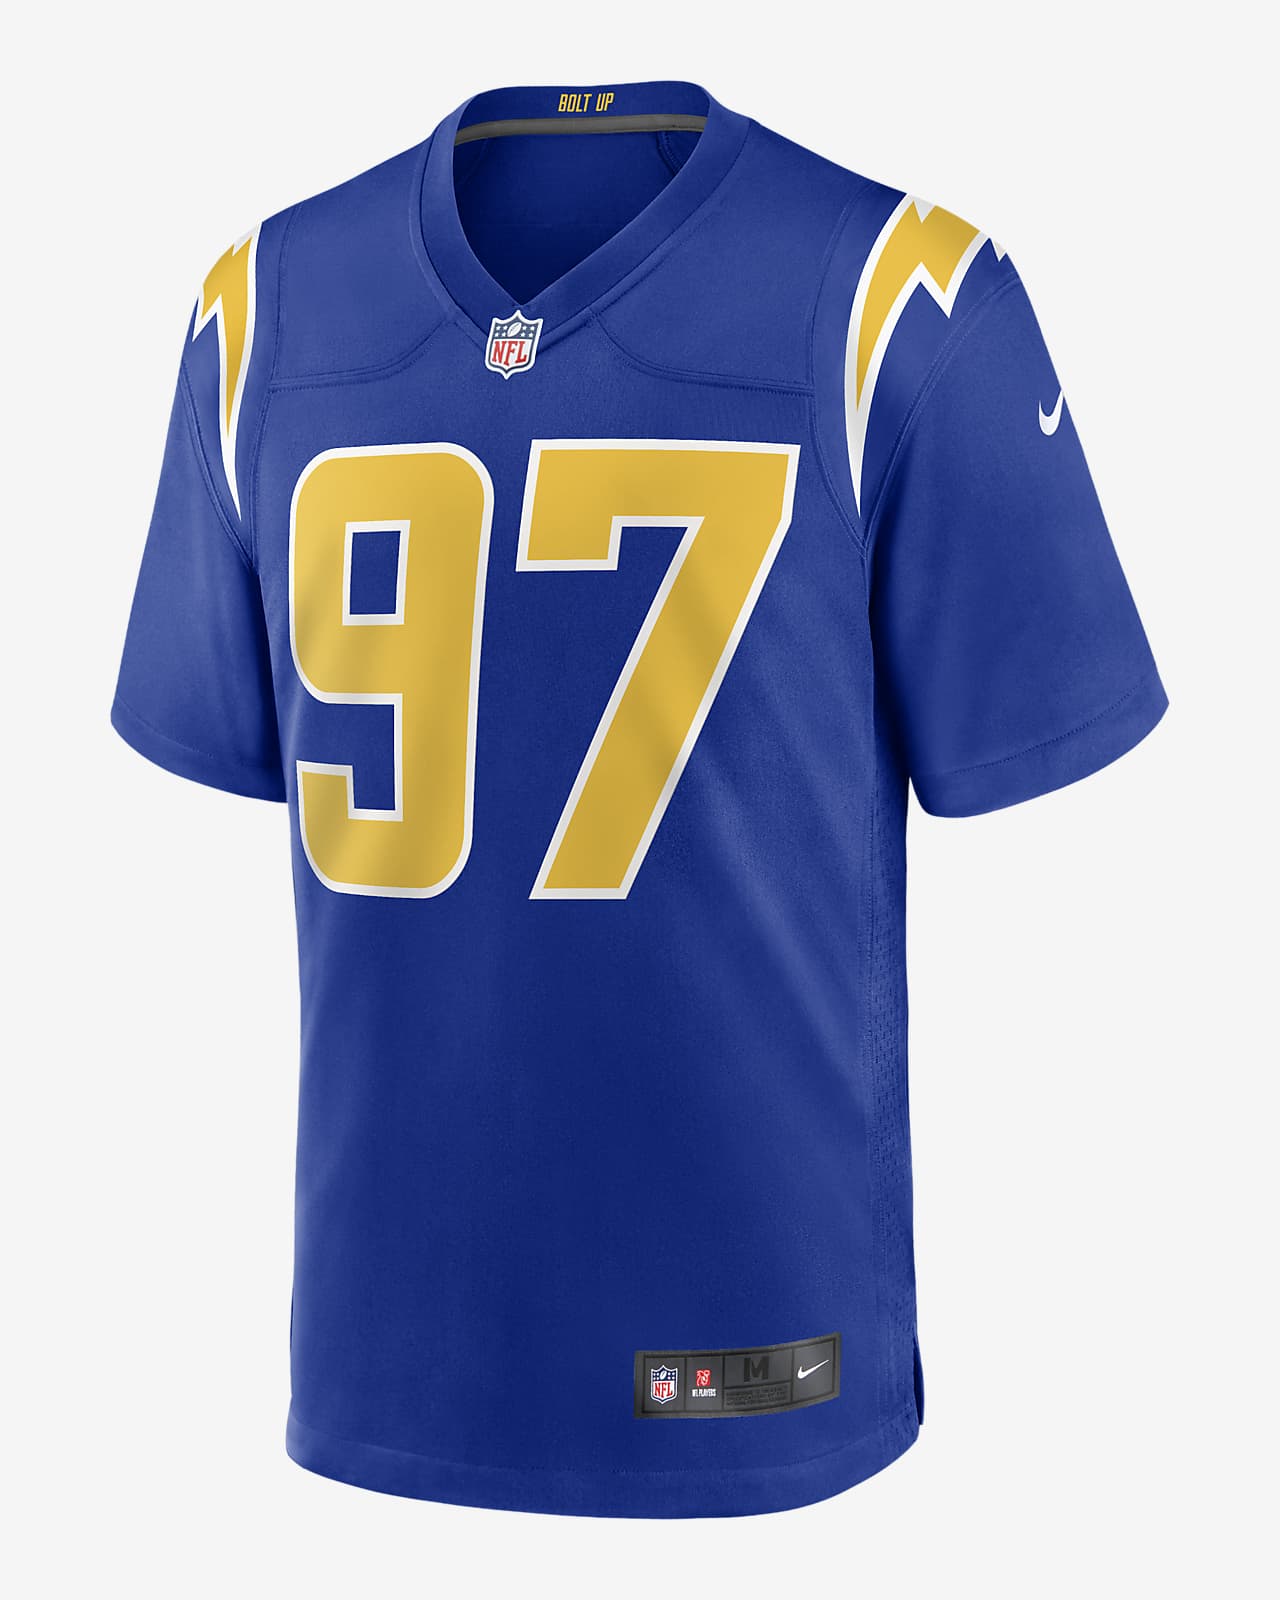 NFL Los Angeles Chargers (Joey Bosa) Men's Game Football Jersey